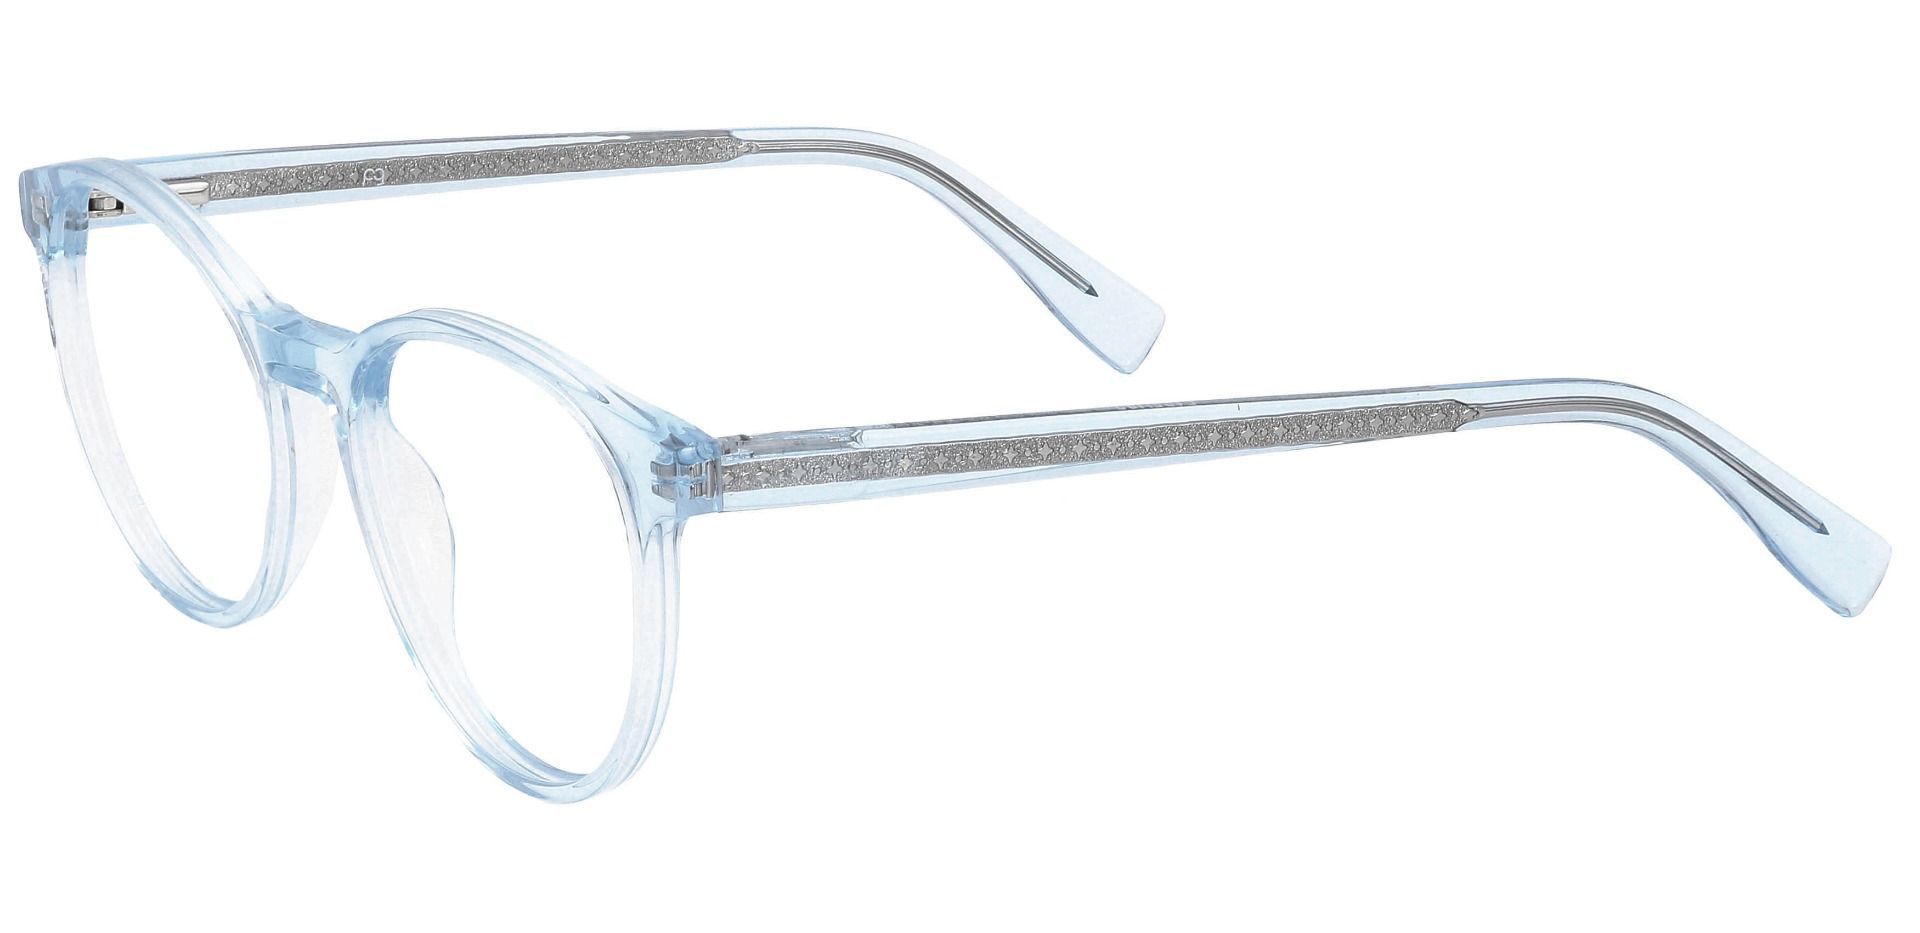 Stellar Oval Lined Bifocal Glasses - The Frame Is Clear With Light Blue